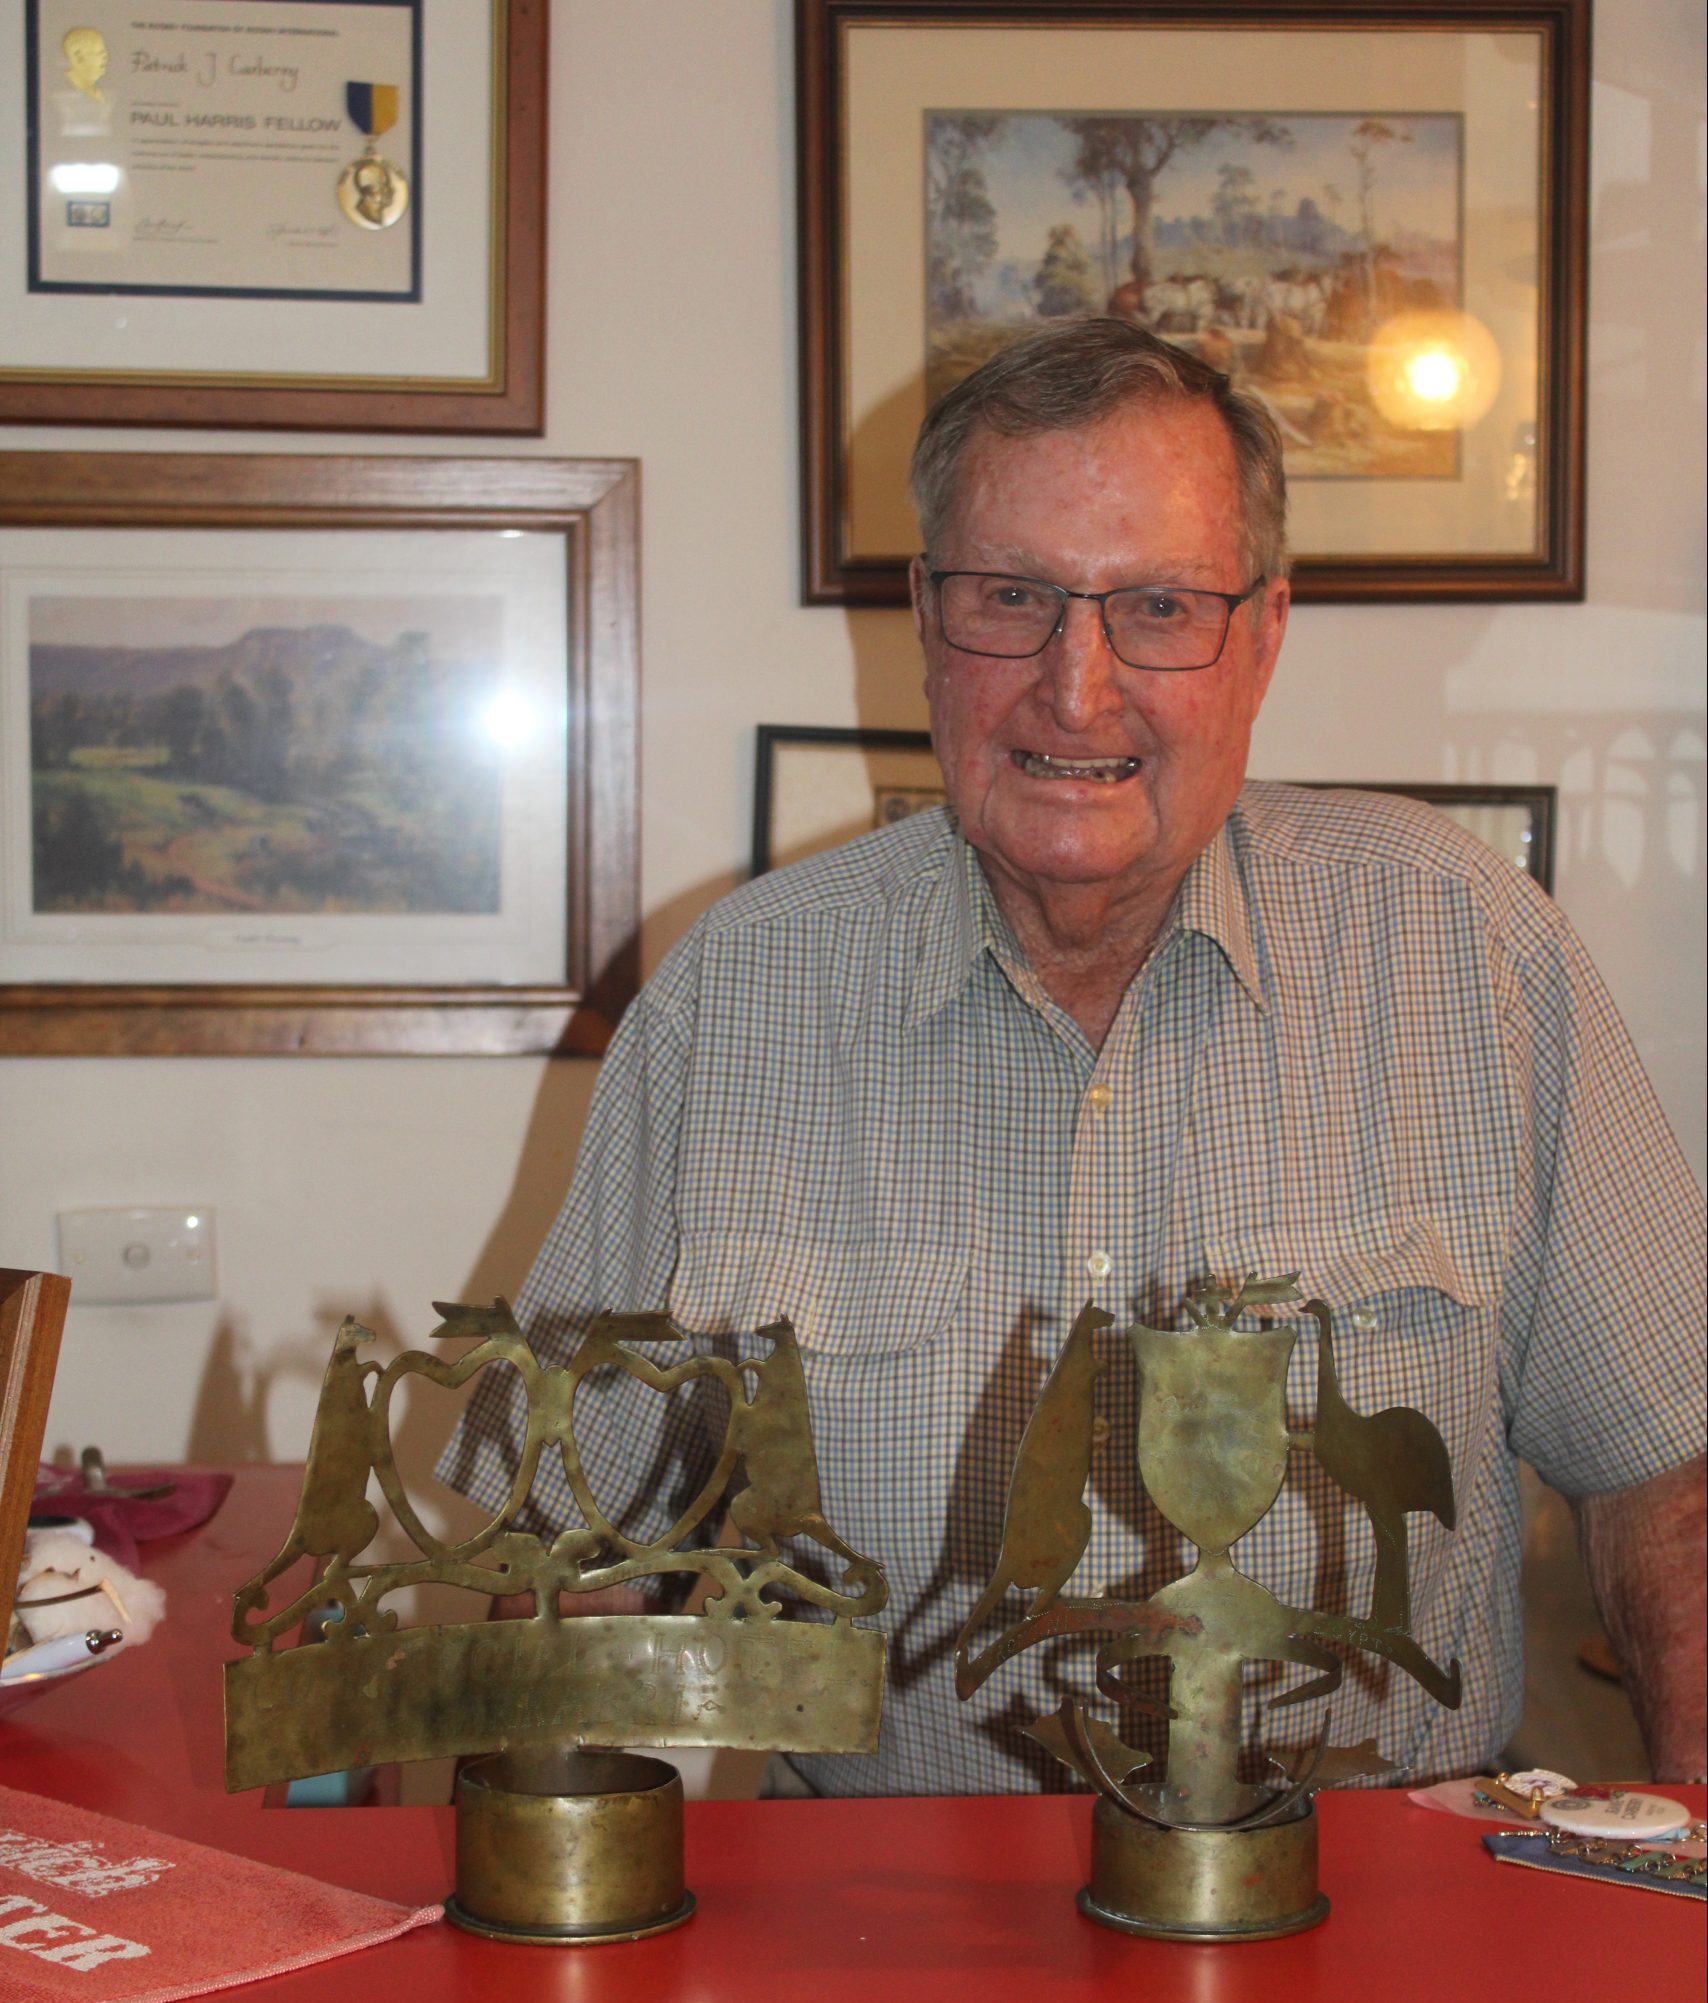 World War I trench art finds its way back home